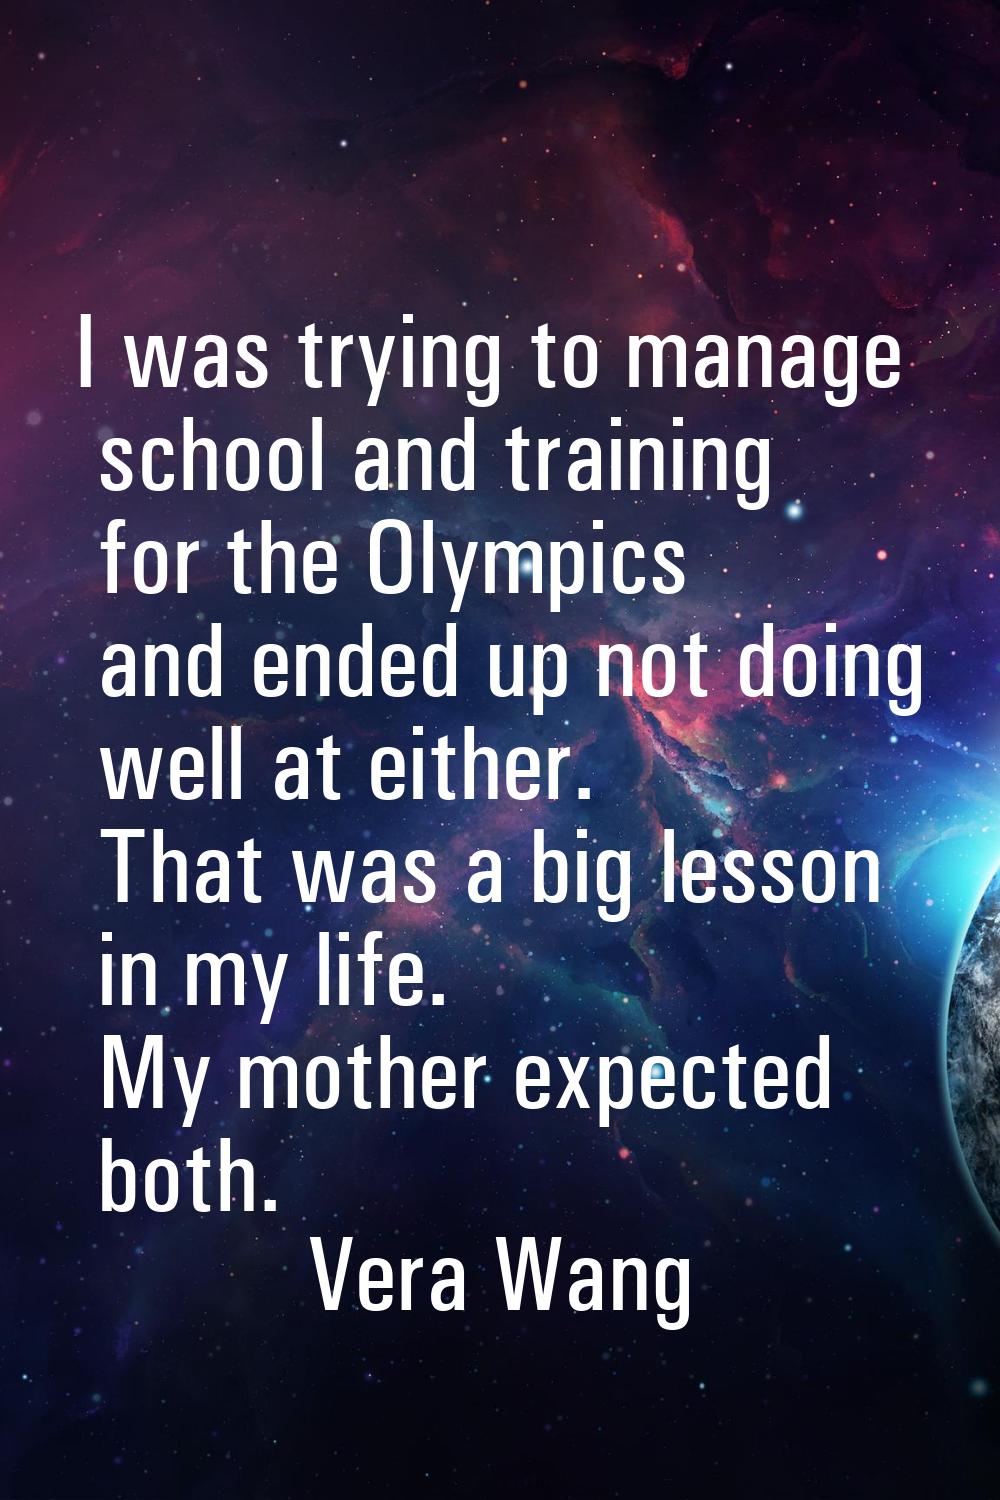 I was trying to manage school and training for the Olympics and ended up not doing well at either. 